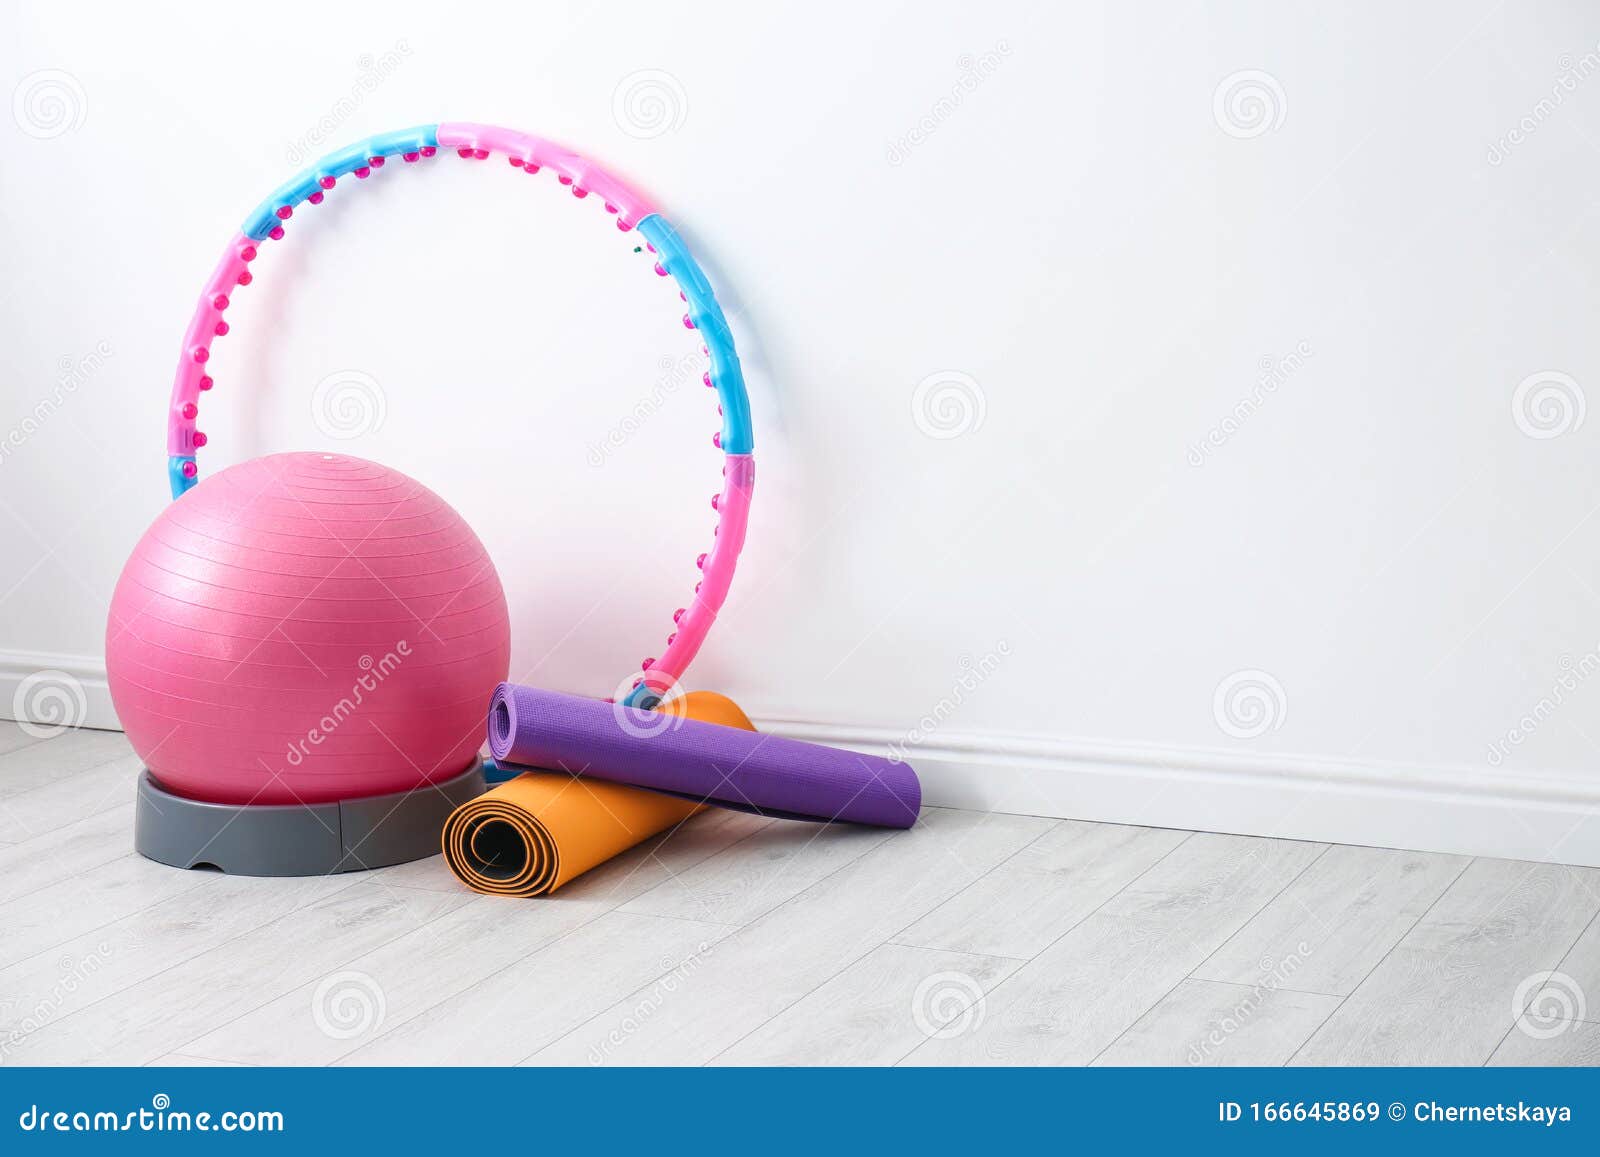 Different Sports Equipment Near White Wall In Gym Stock Image - Image of white, gymnastic: 166645869